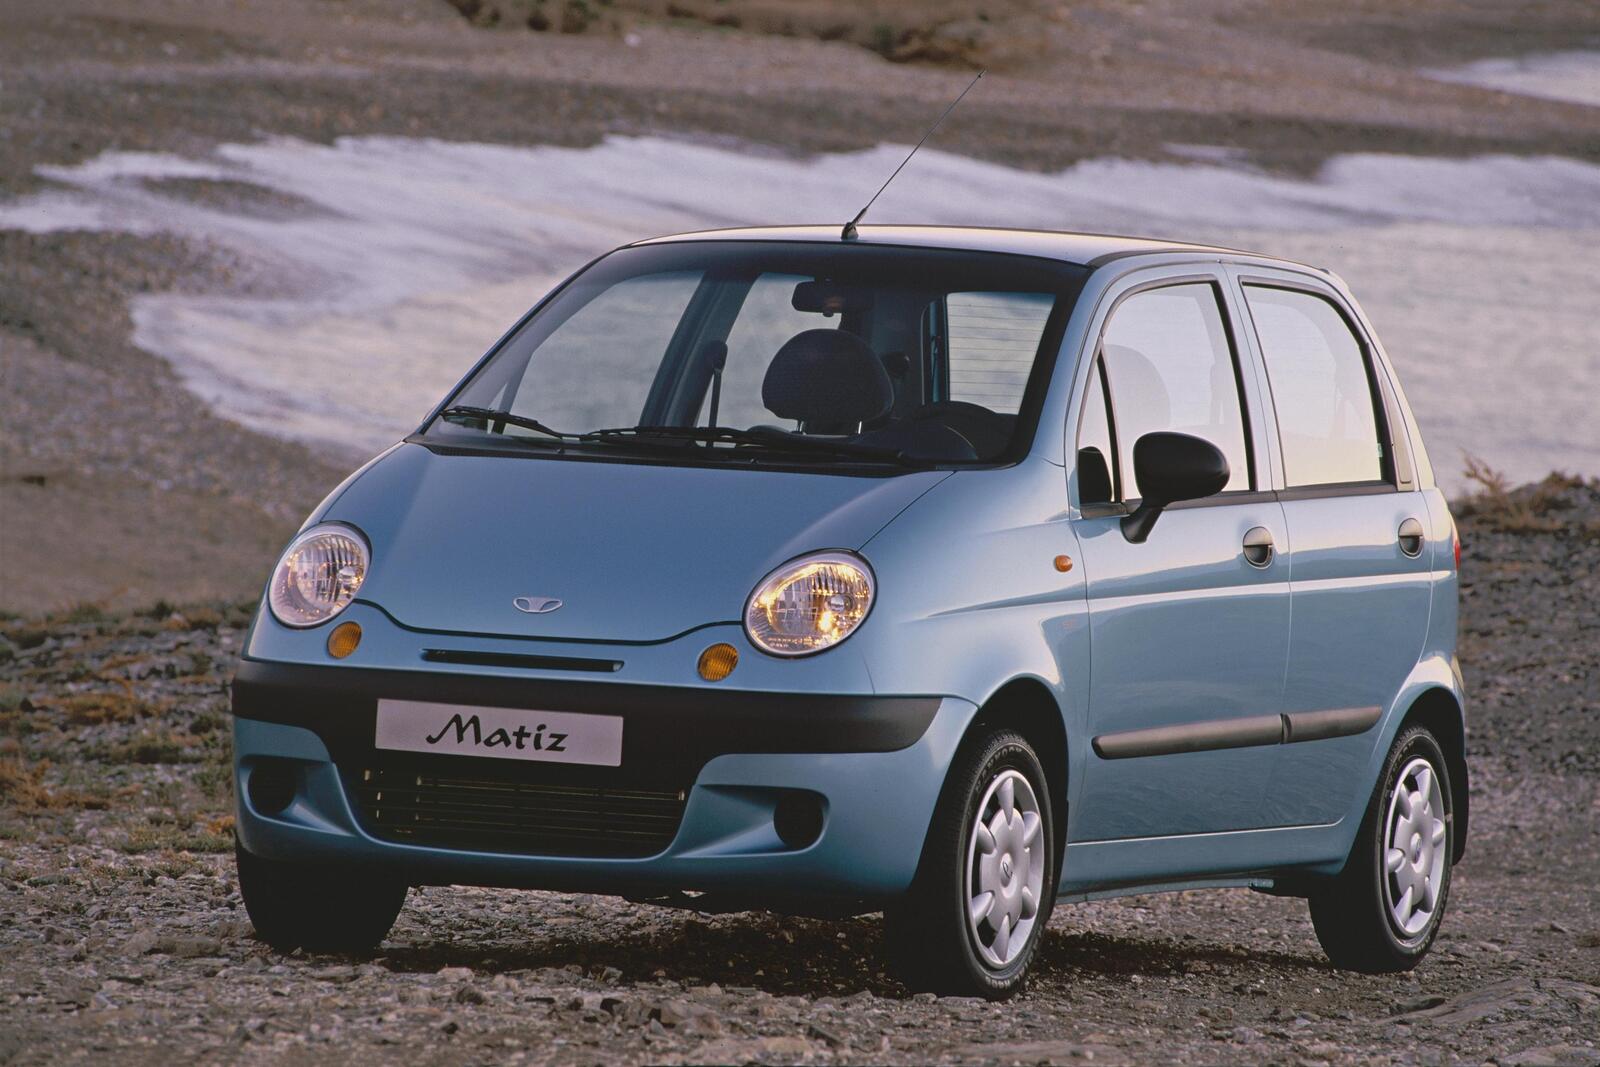 Free photo Download matiz car wallpaper to your phone for free